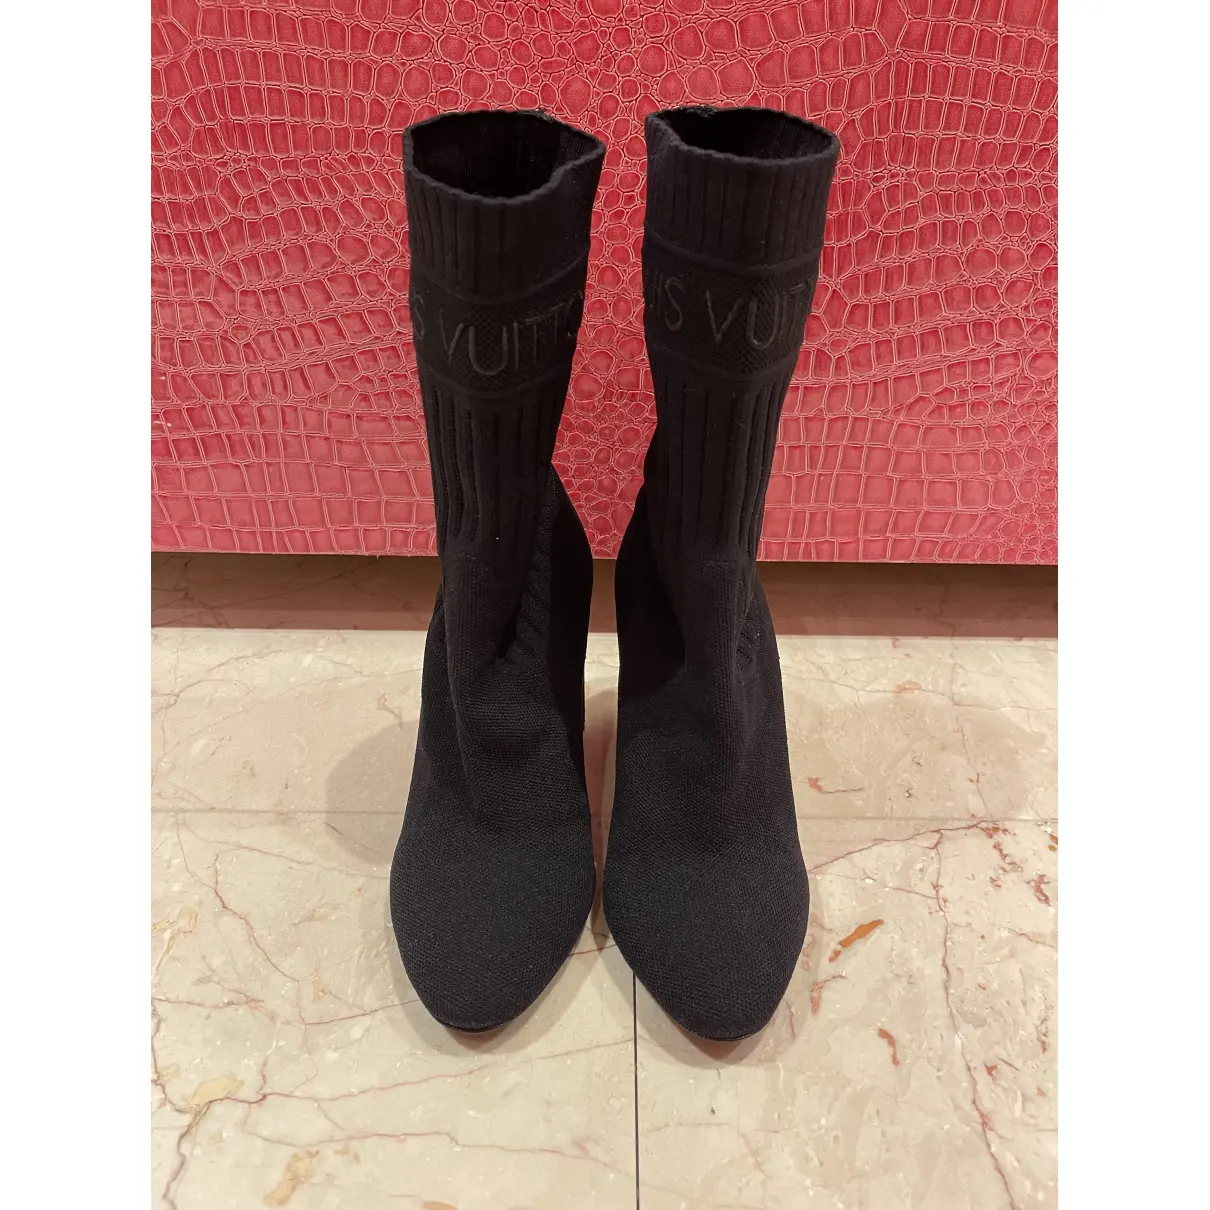 Silhouette cloth ankle boots Louis Vuitton